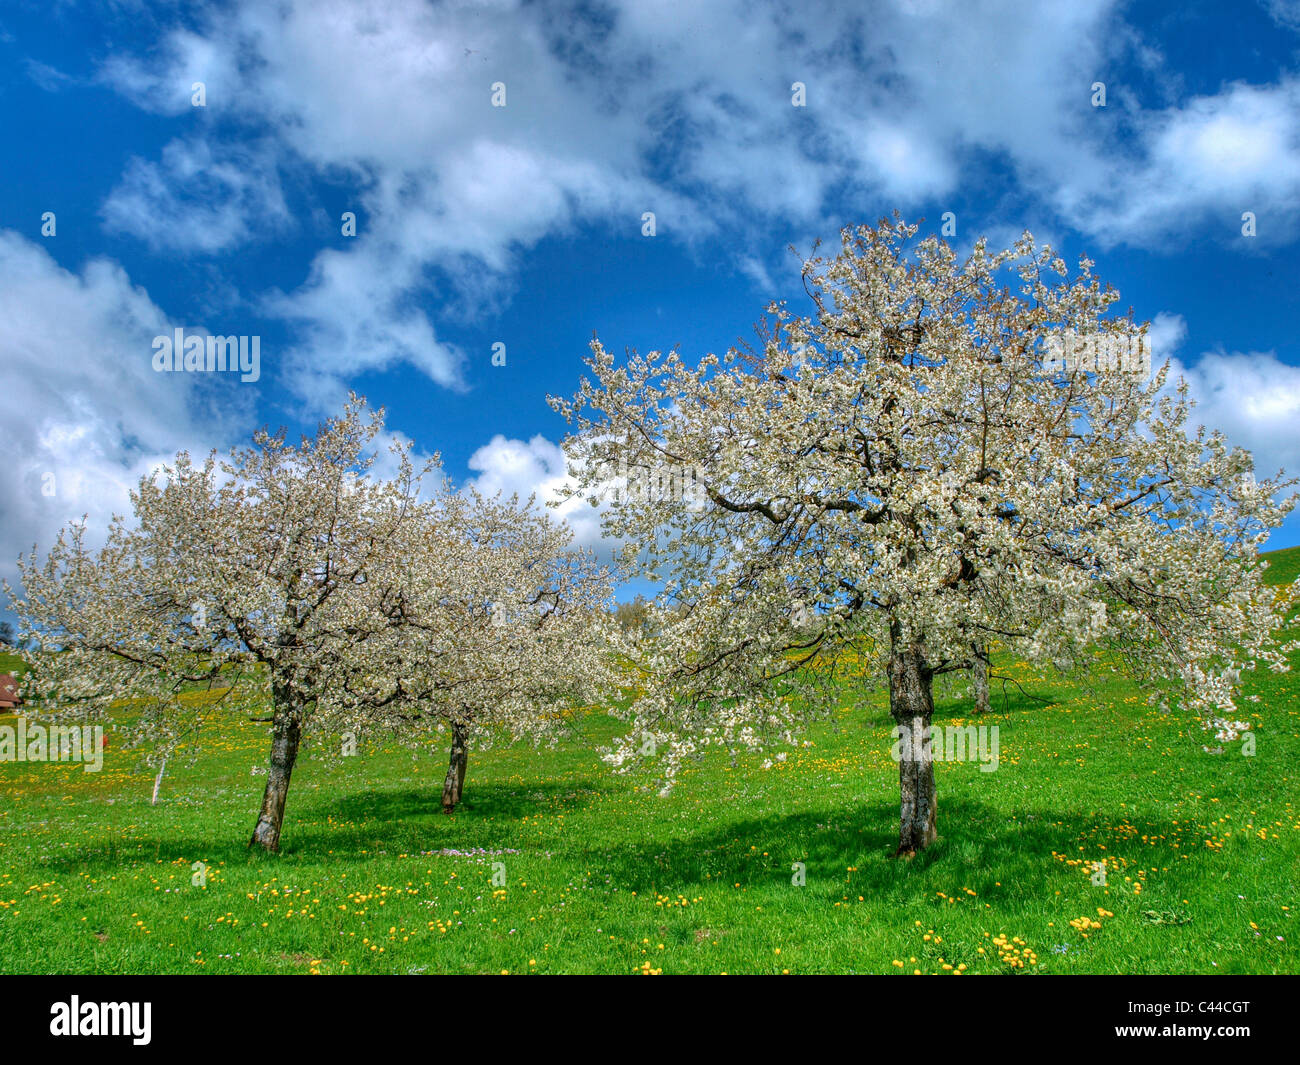 Spring, cherry trees, scenery, nature, horizontal format, day, meadow, clouds, trees, Gubel, canton Zug, spring, Stock Photo